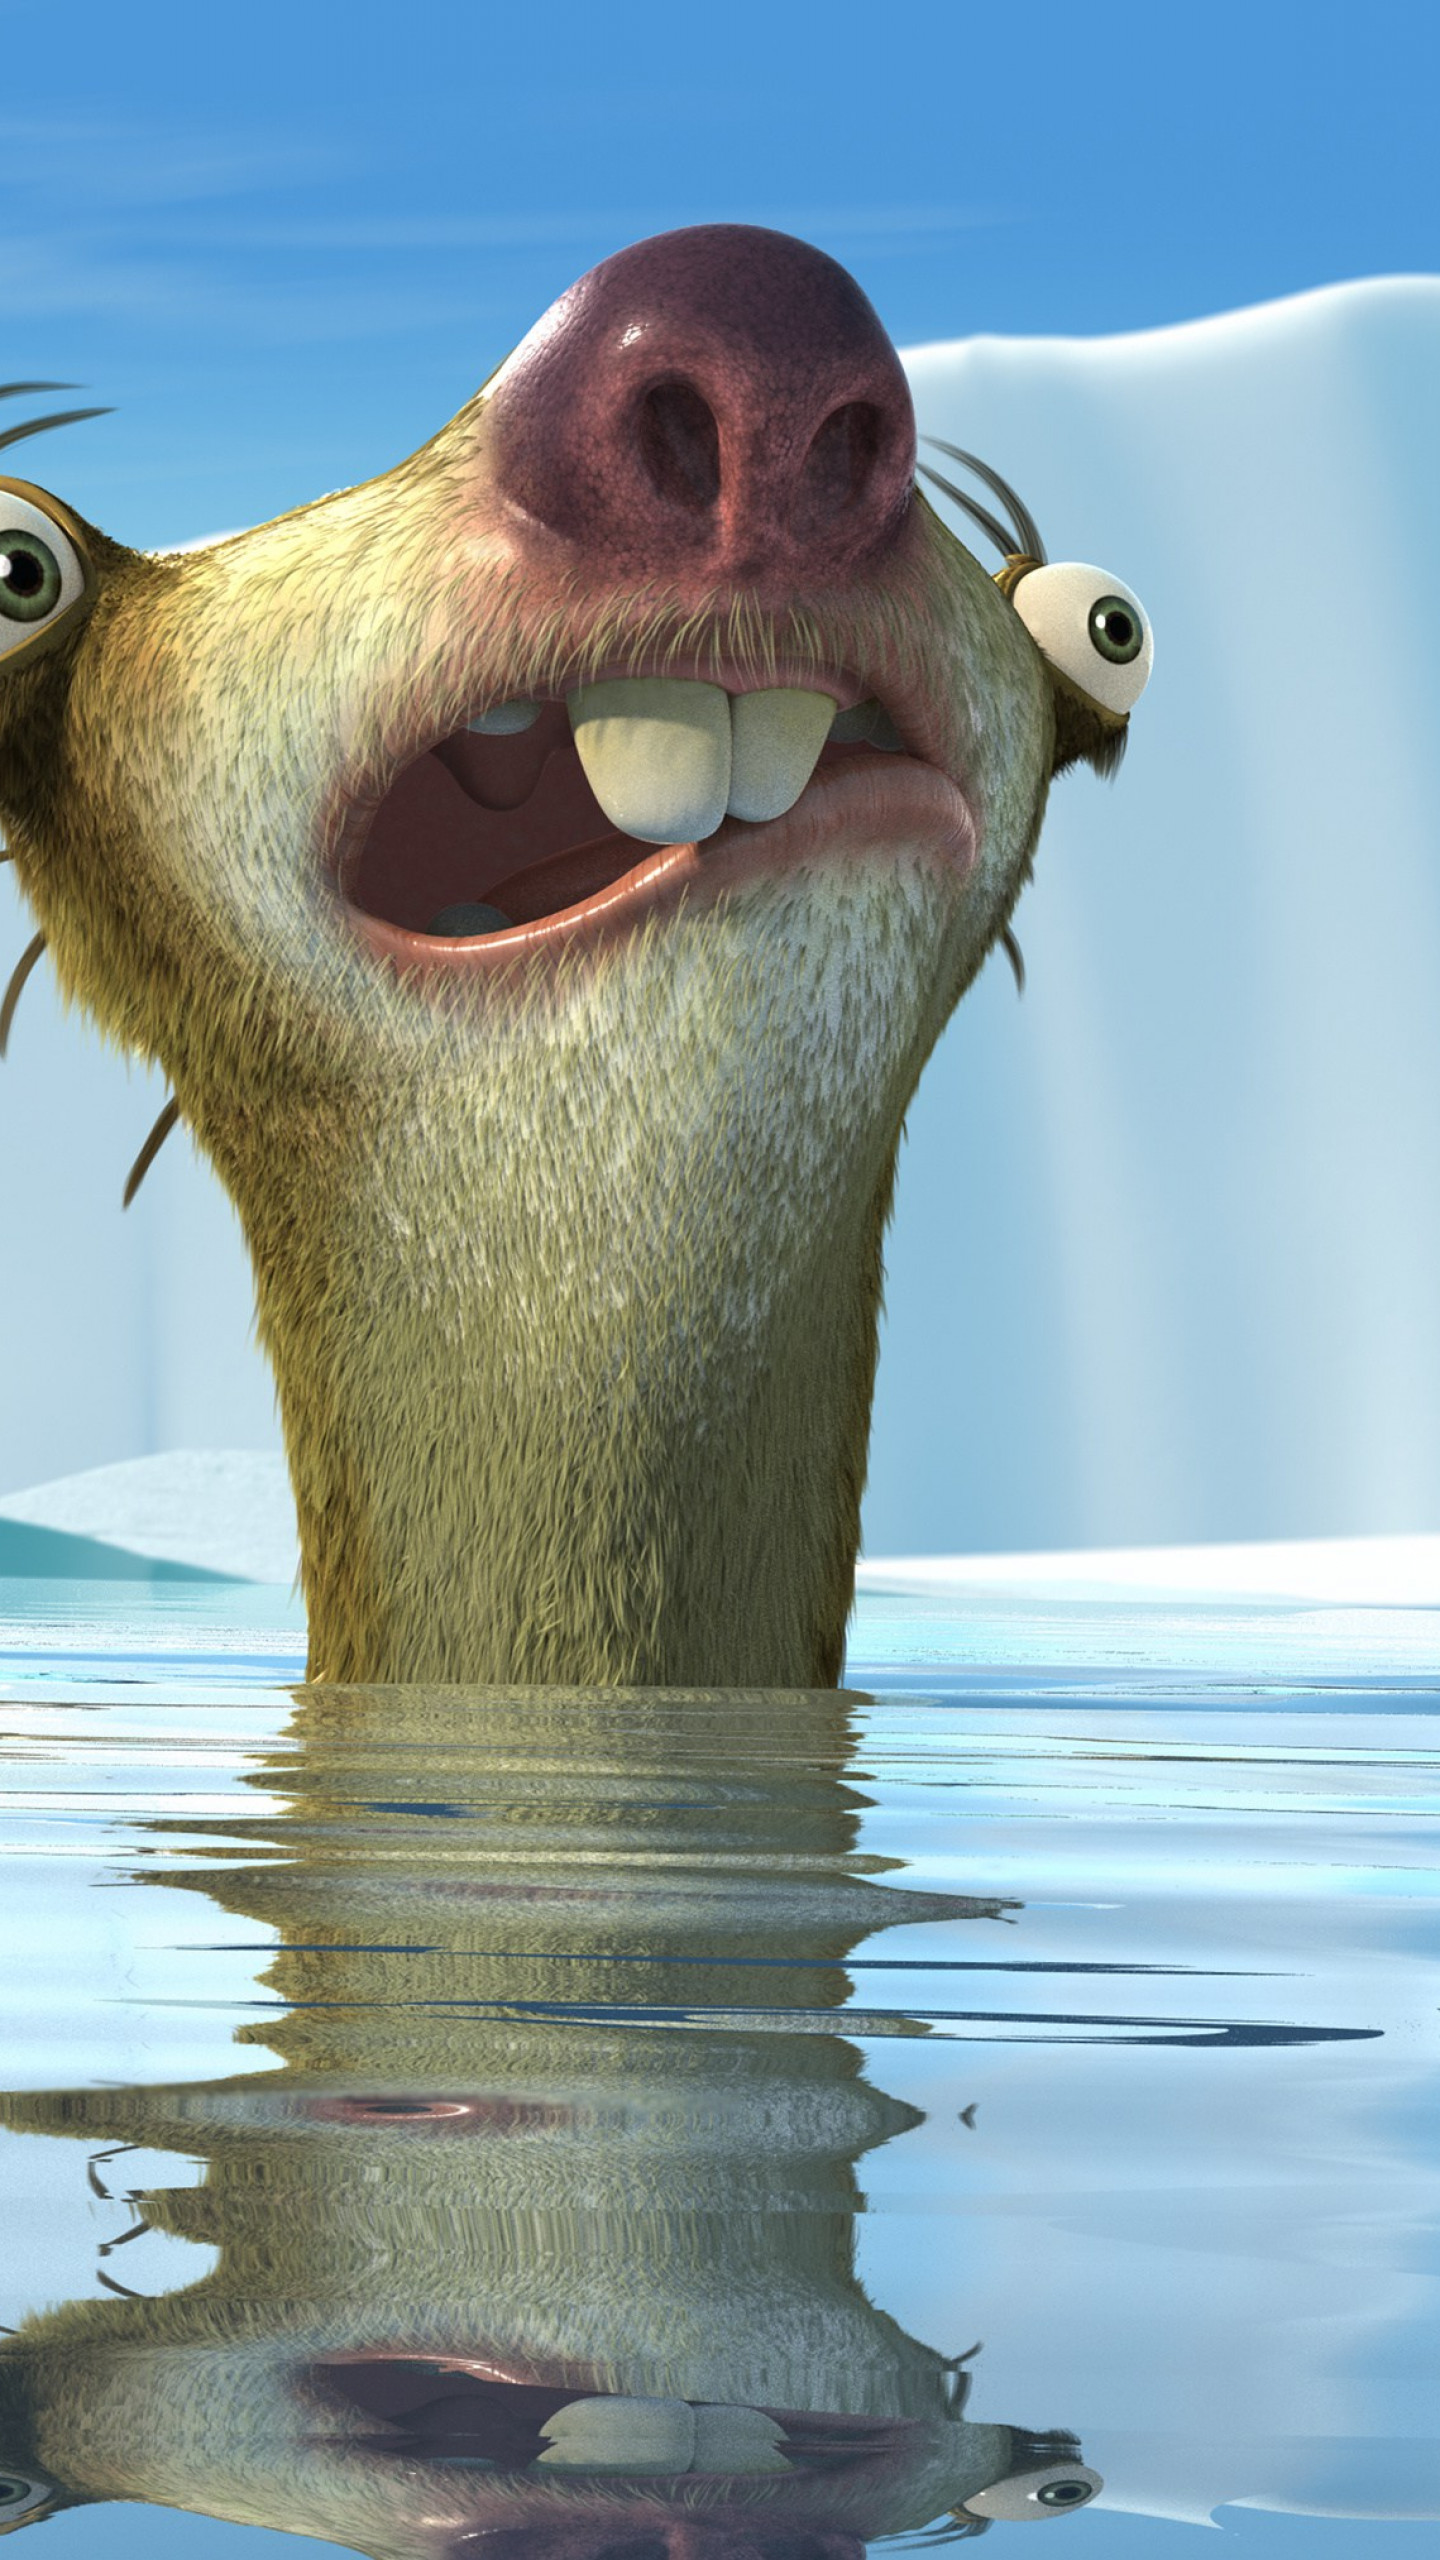 ice age sid collision course animations movies squirrel animation imdb space 2006 meltdown wallpapers wallpapershome fox